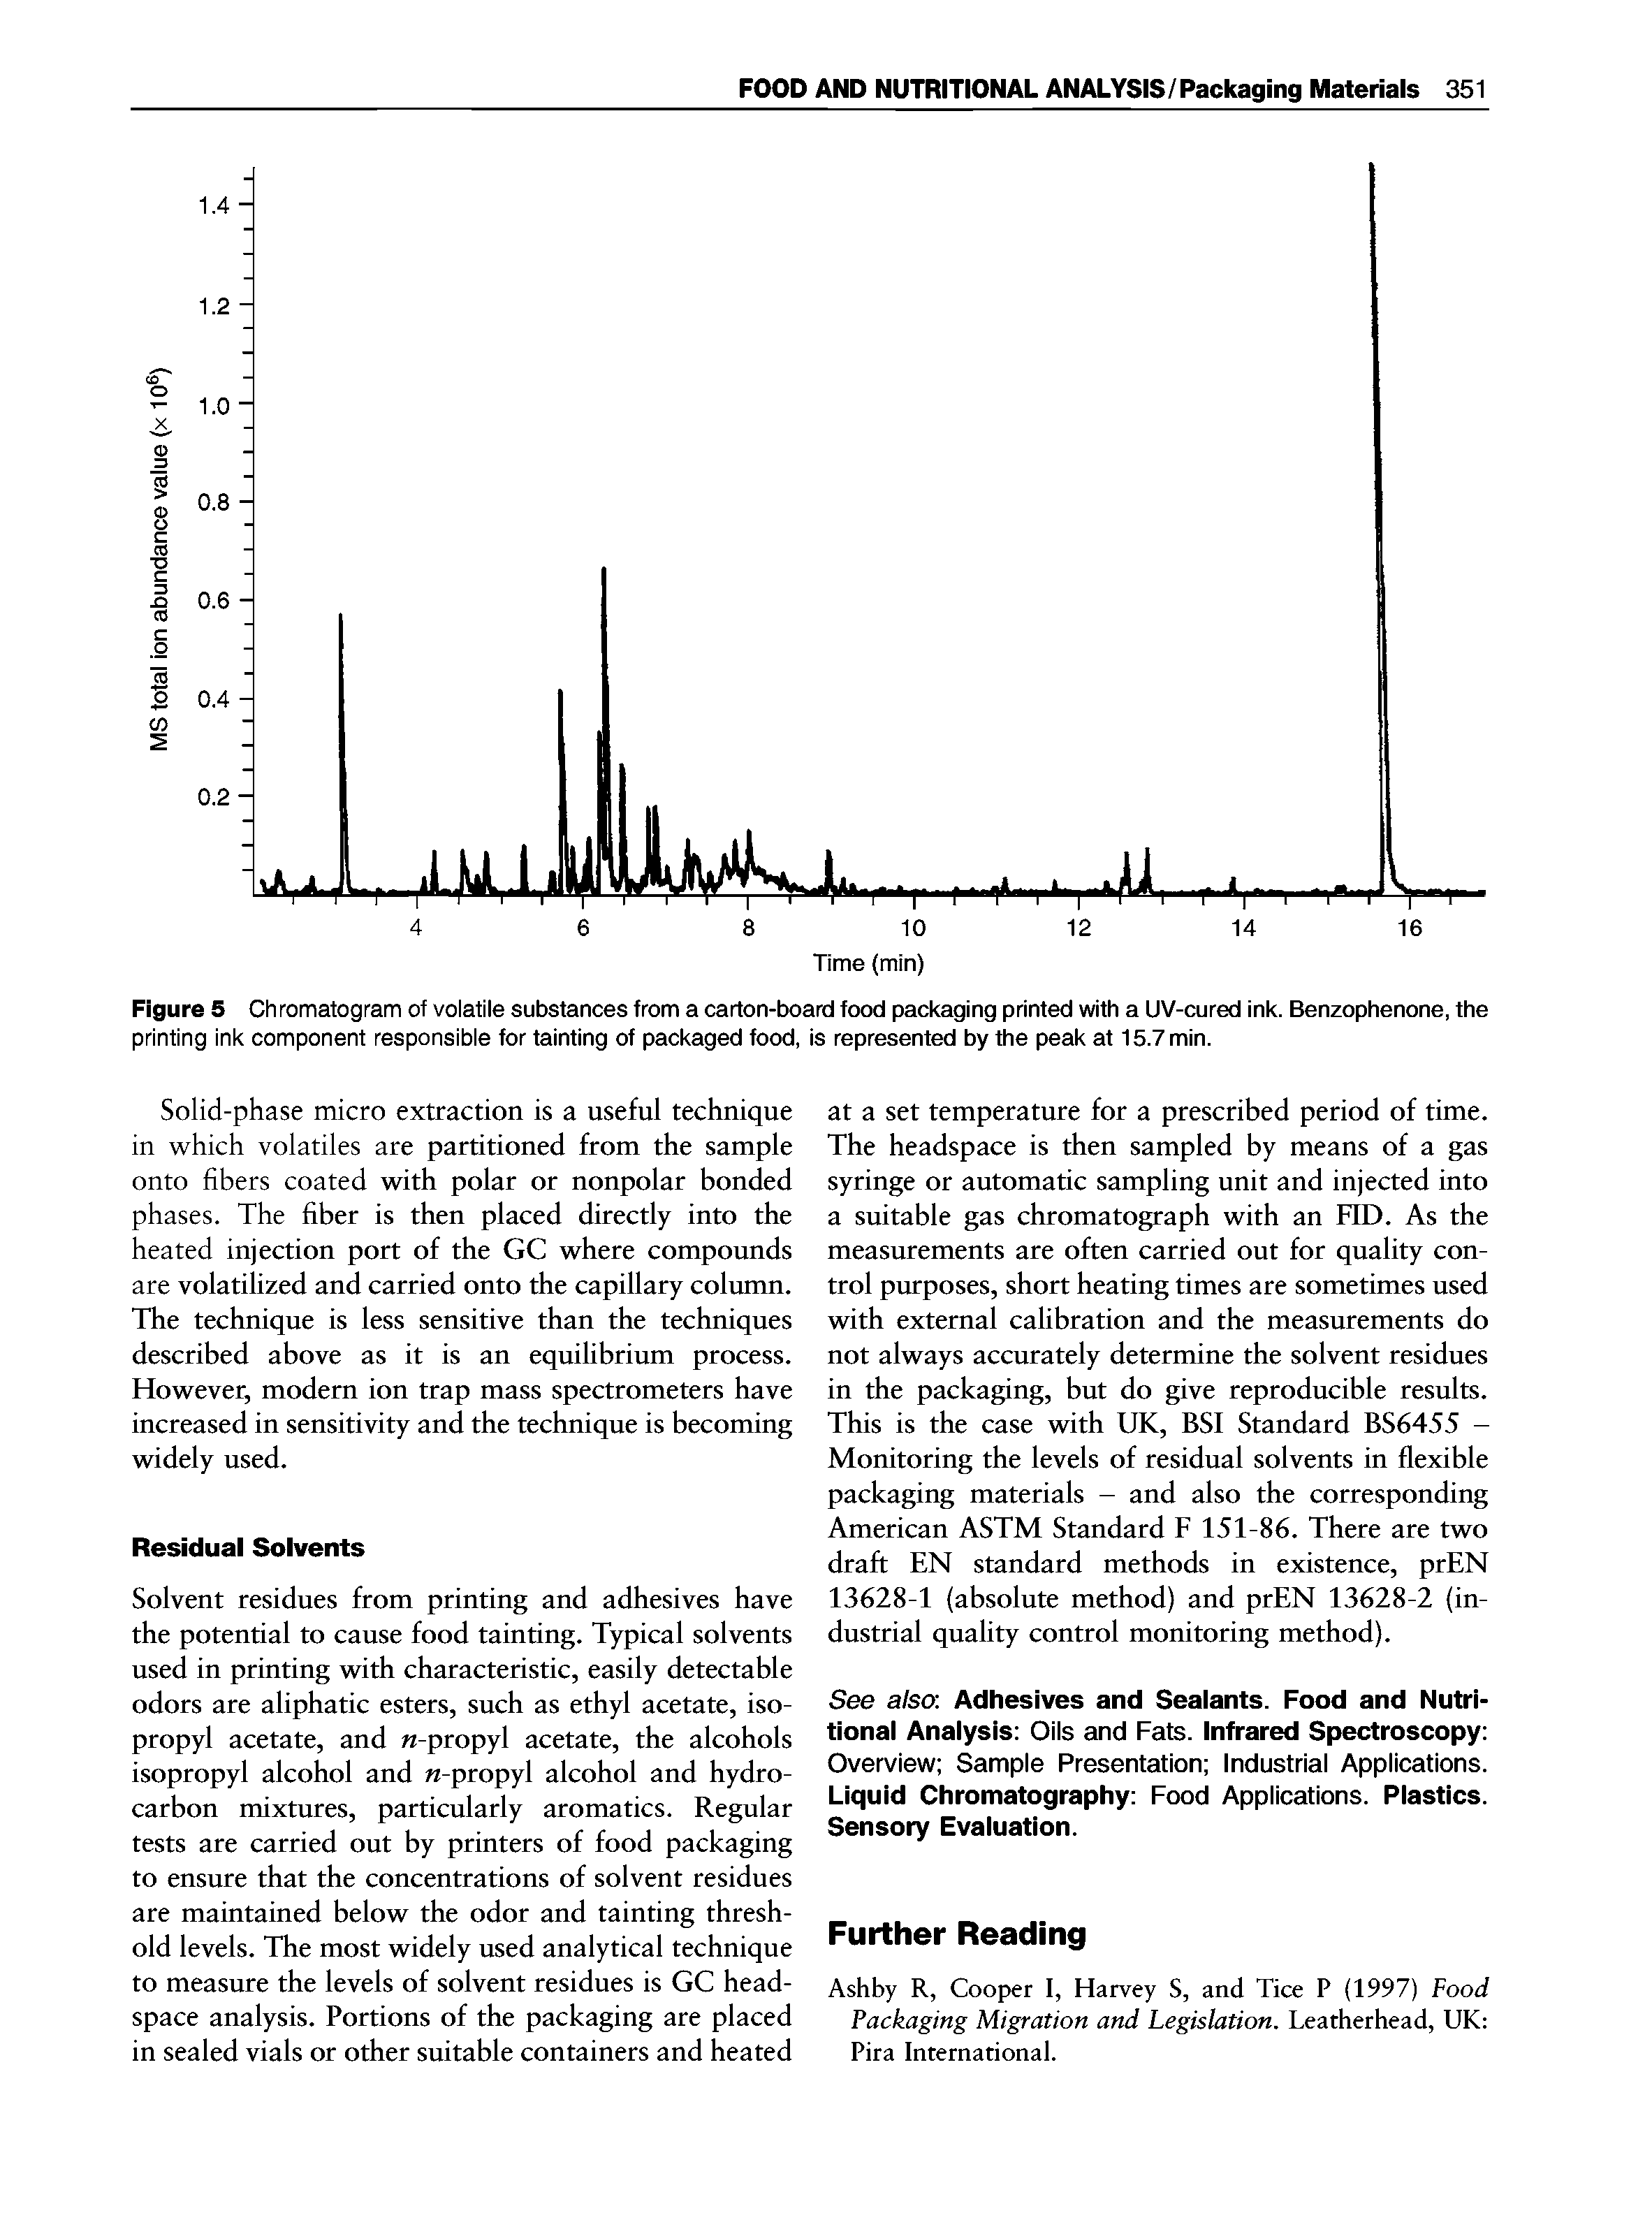 Figure 5 Chromatogram of volatile substances from a carton-board food packaging printed with a LIV-cured ink. Benzophenone, the printing ink component responsible for tainting of packaged food, is represented by the peak at 15.7 min.